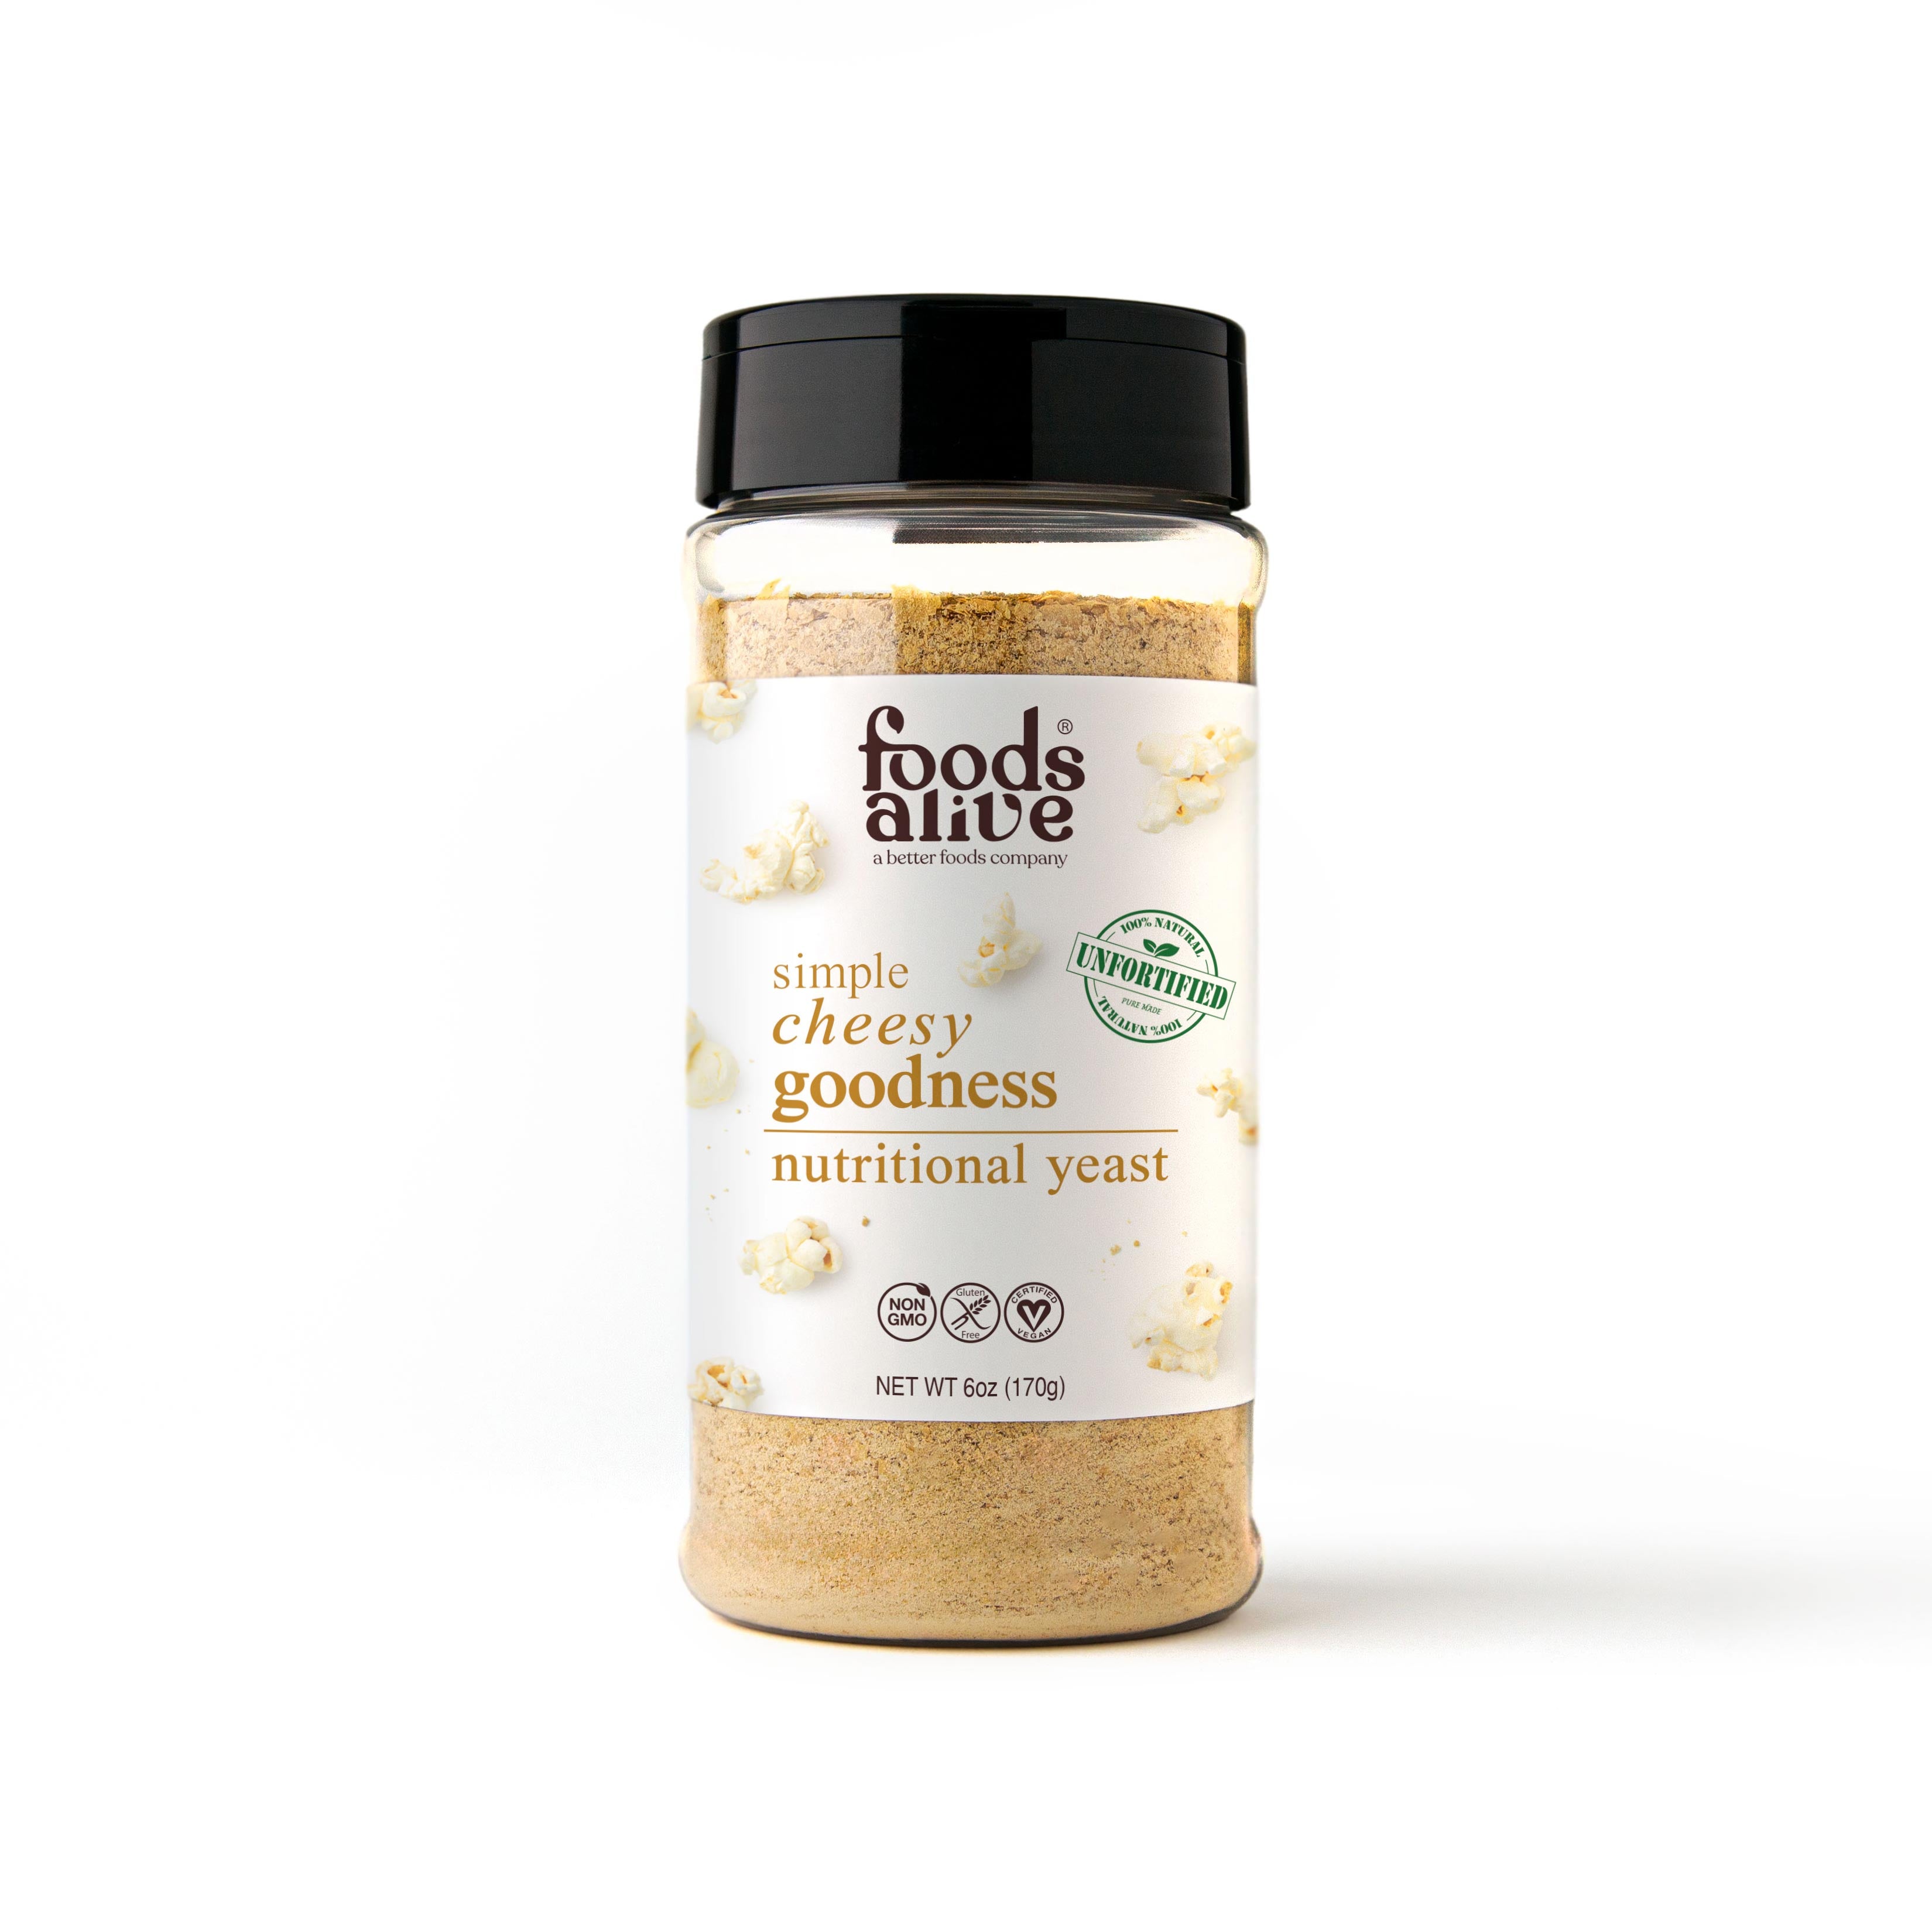 Simple Cheesy Goodness Nutritional Yeast - 6 oz Shaker Bottle